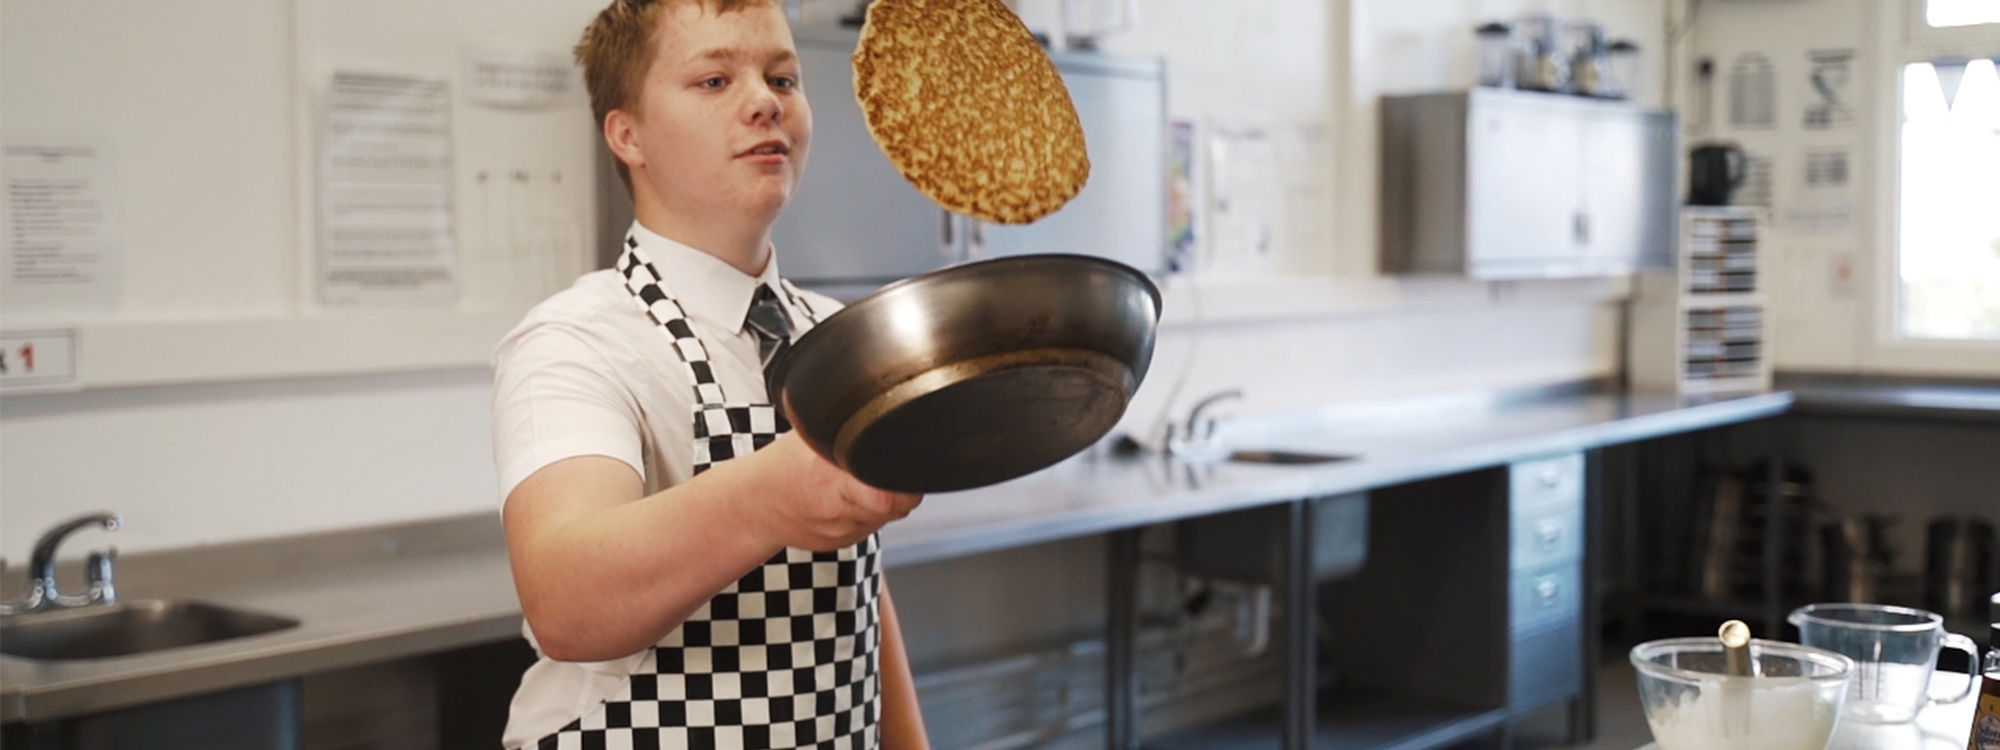 Student cooking pancakes